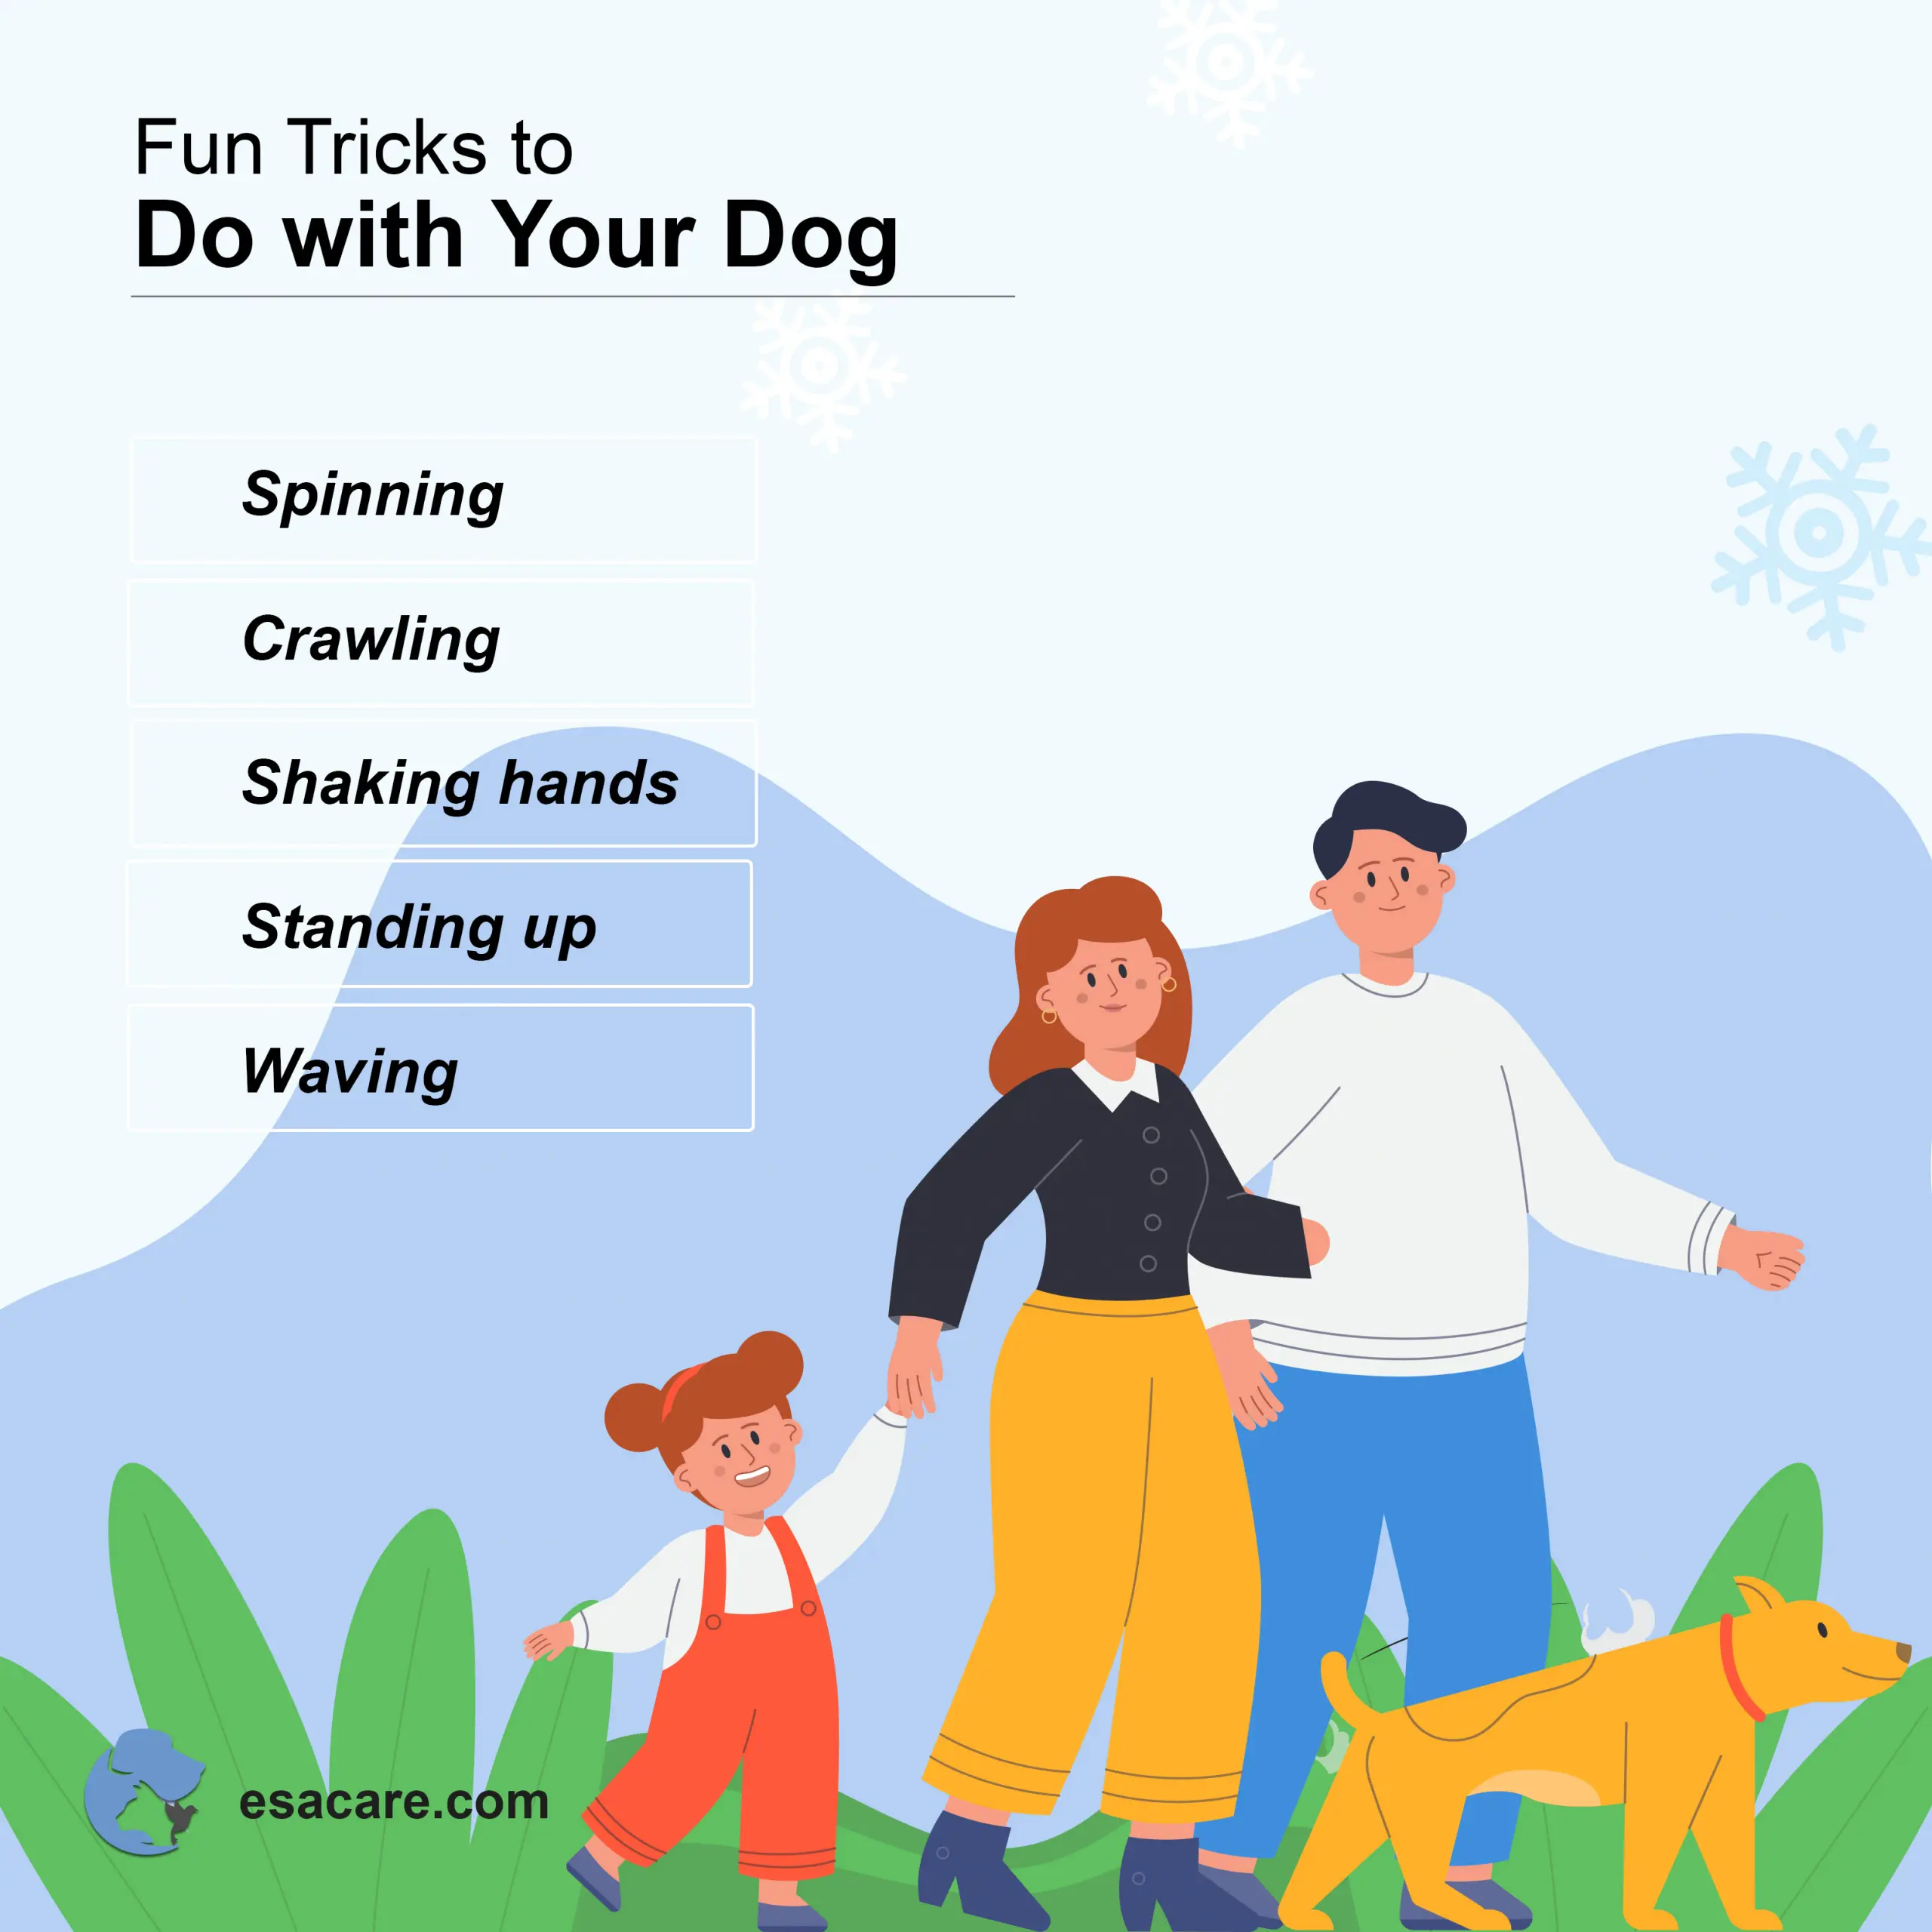 How to Entertain Your Canine Companion Indoors